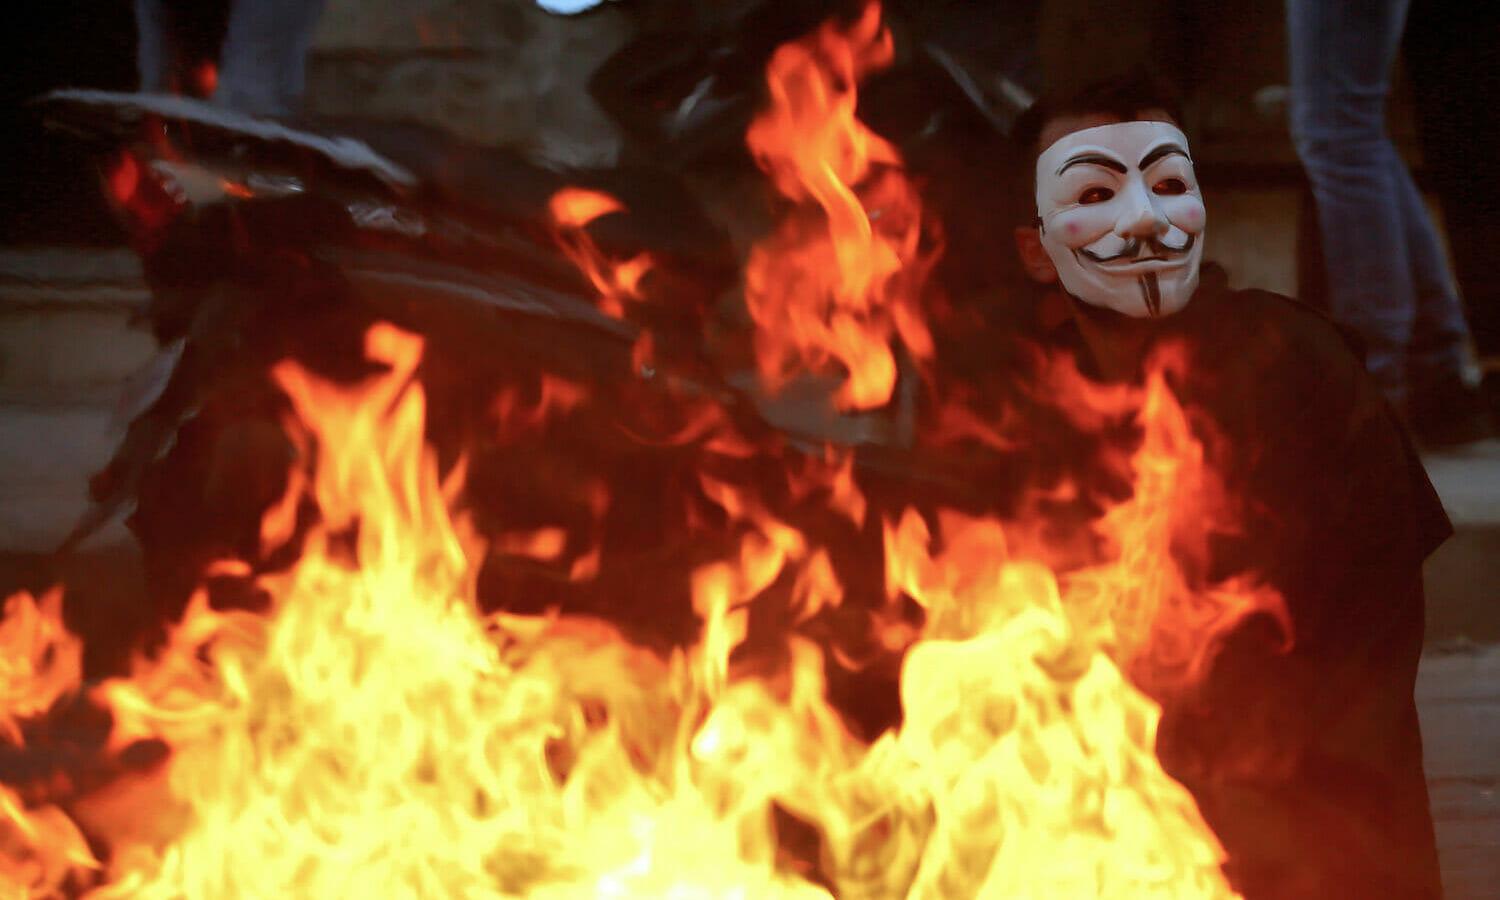 An anti-government activist, displaying anonymous mask, sits near bone fire during clashes with riot police in Beirut. (Marwan Naamani/picture alliance via Getty Images)